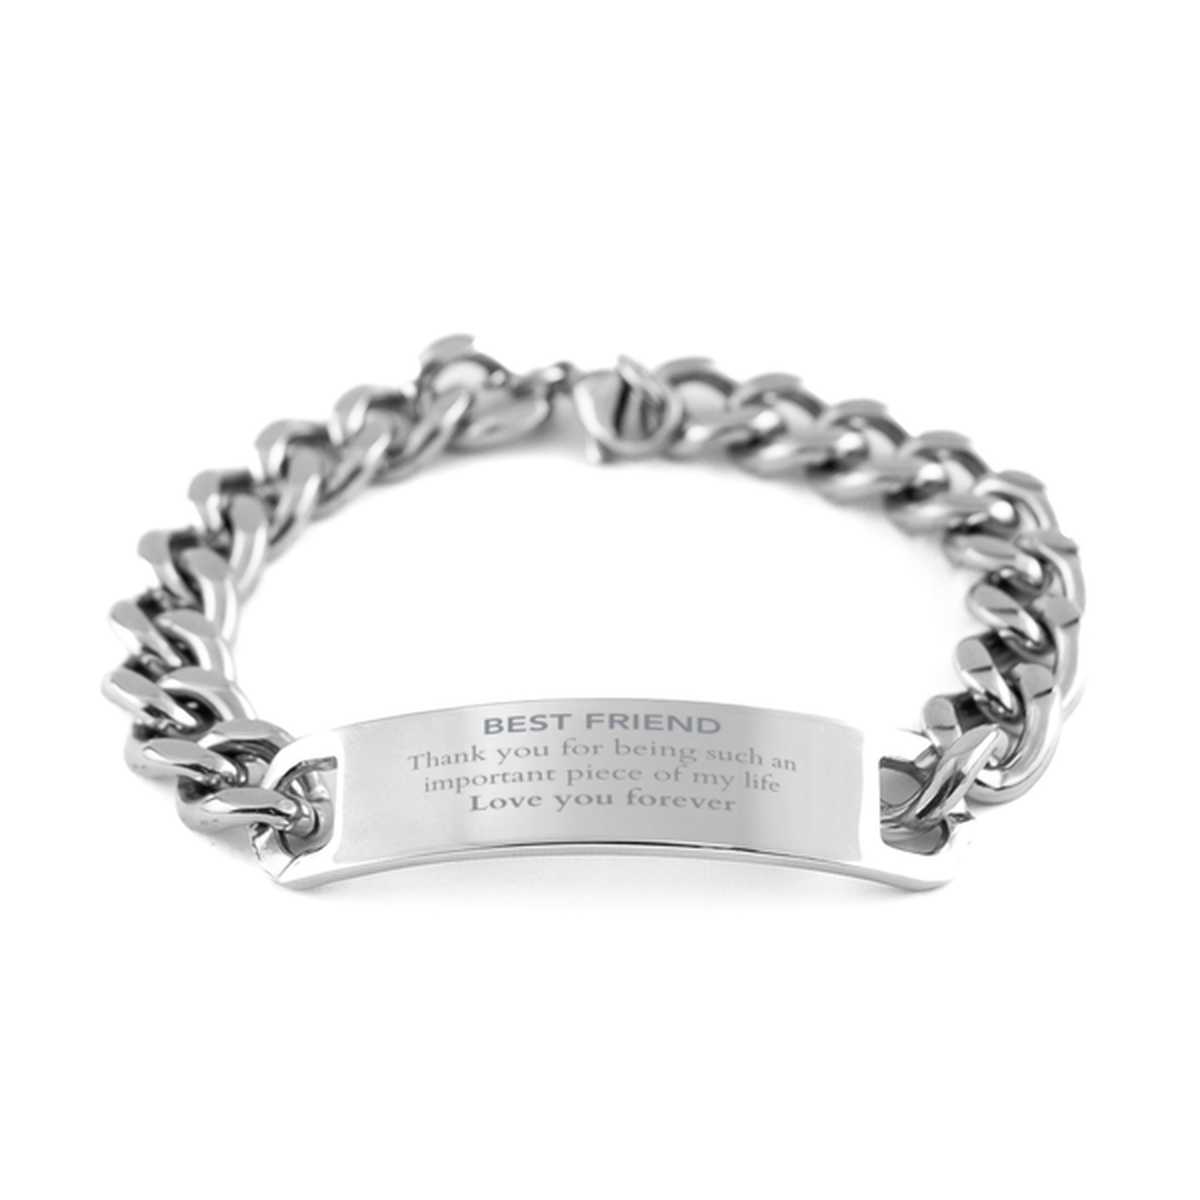 Appropriate Best Friend Cuban Chain Stainless Steel Bracelet Epic Birthday Gifts for Best Friend Thank you for being such an important piece of my life Best Friend Christmas Mothers Fathers Day